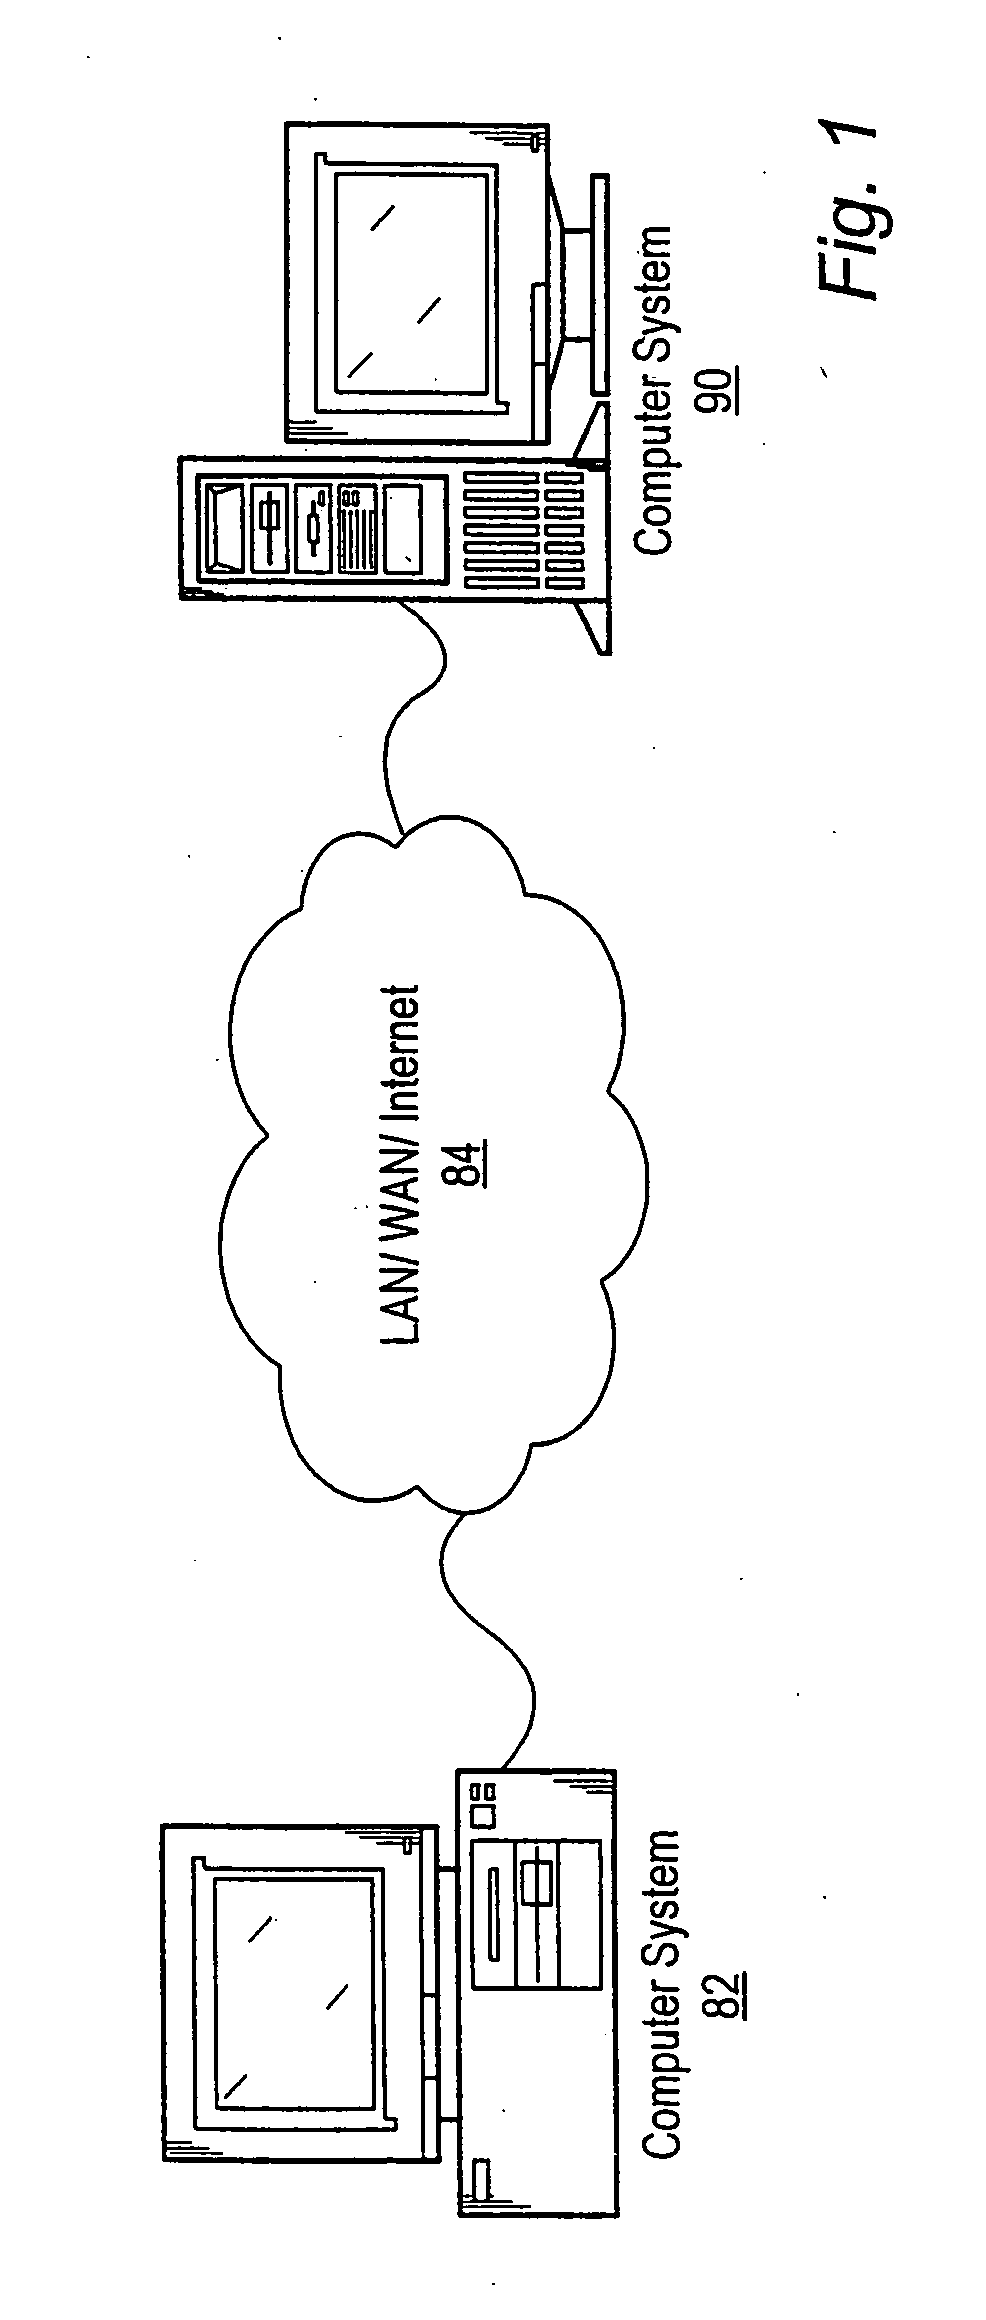 Network-based system for selecting or purchasing hardware products